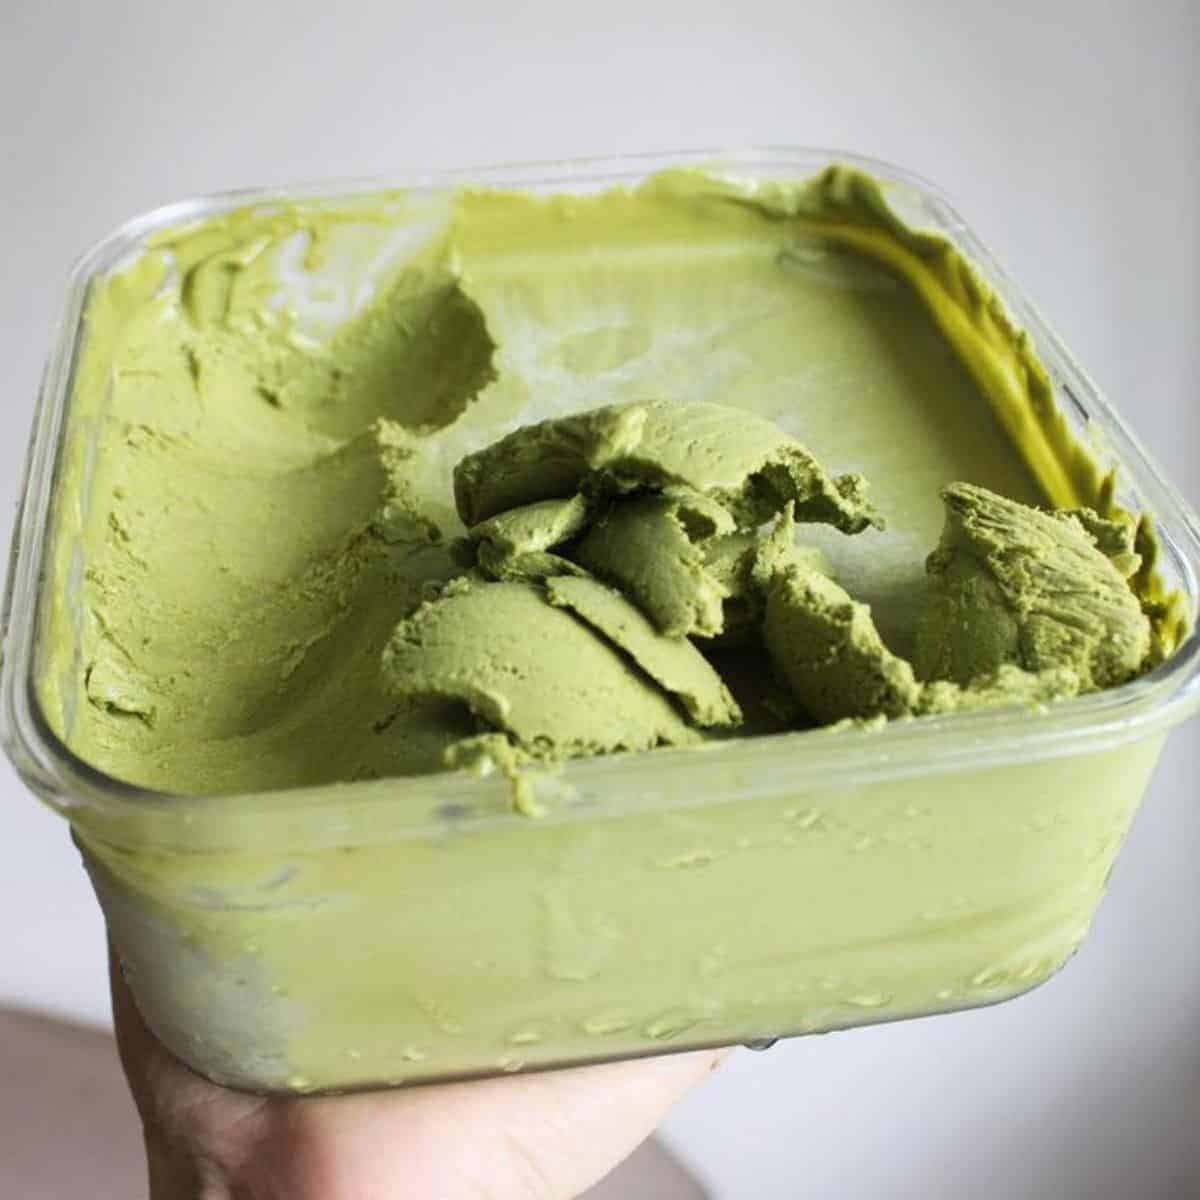 How To Make Green Tea Ice Cream With An Ice Cream Maker